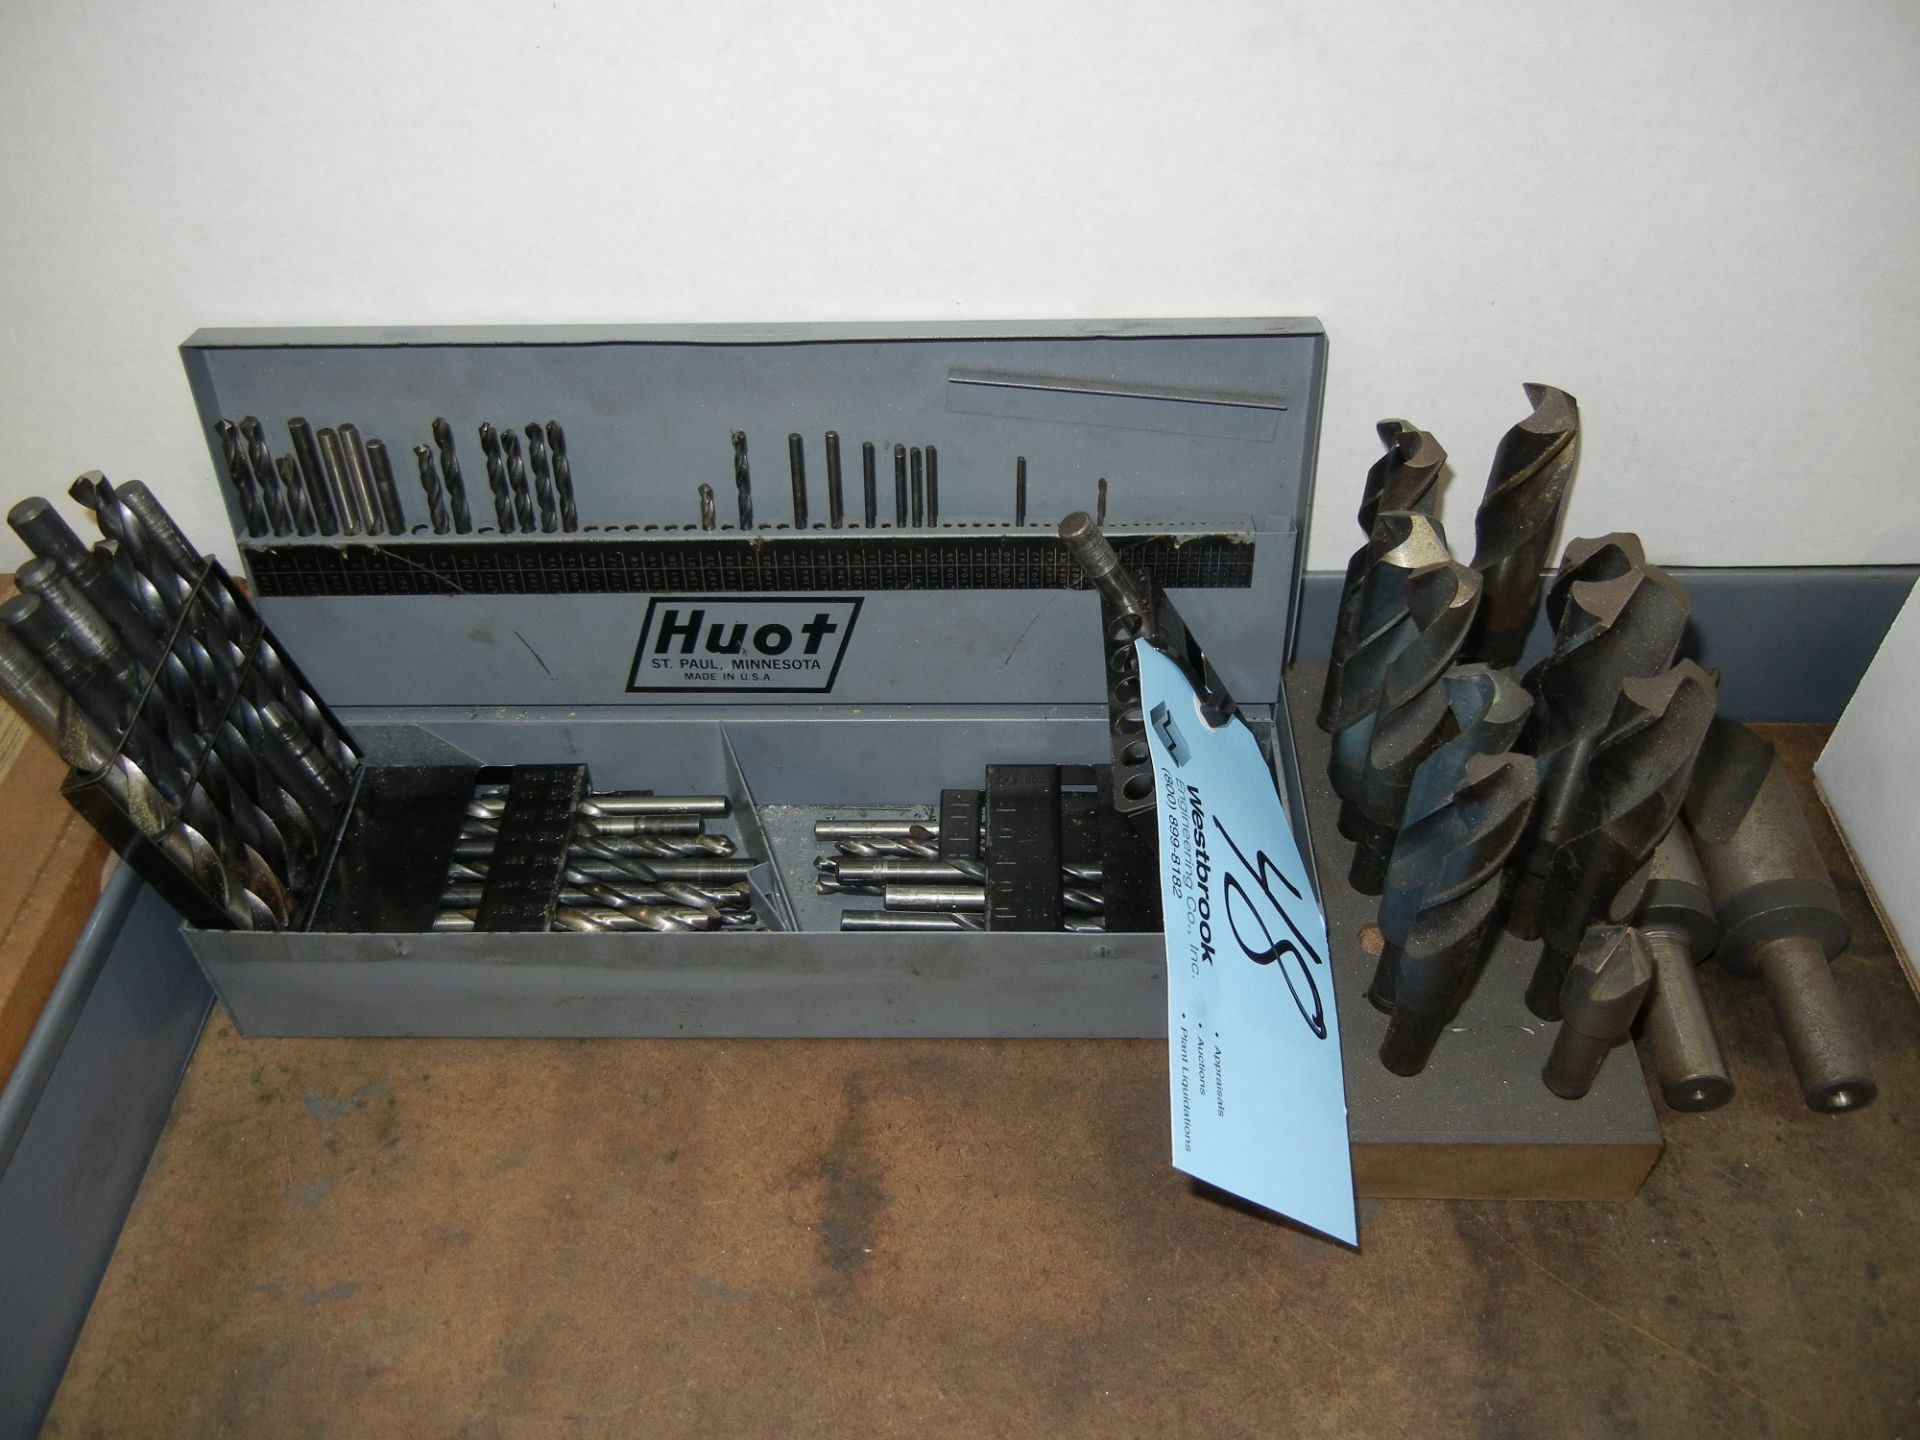 HUOT Drill Index with Drills and Wooden Stand